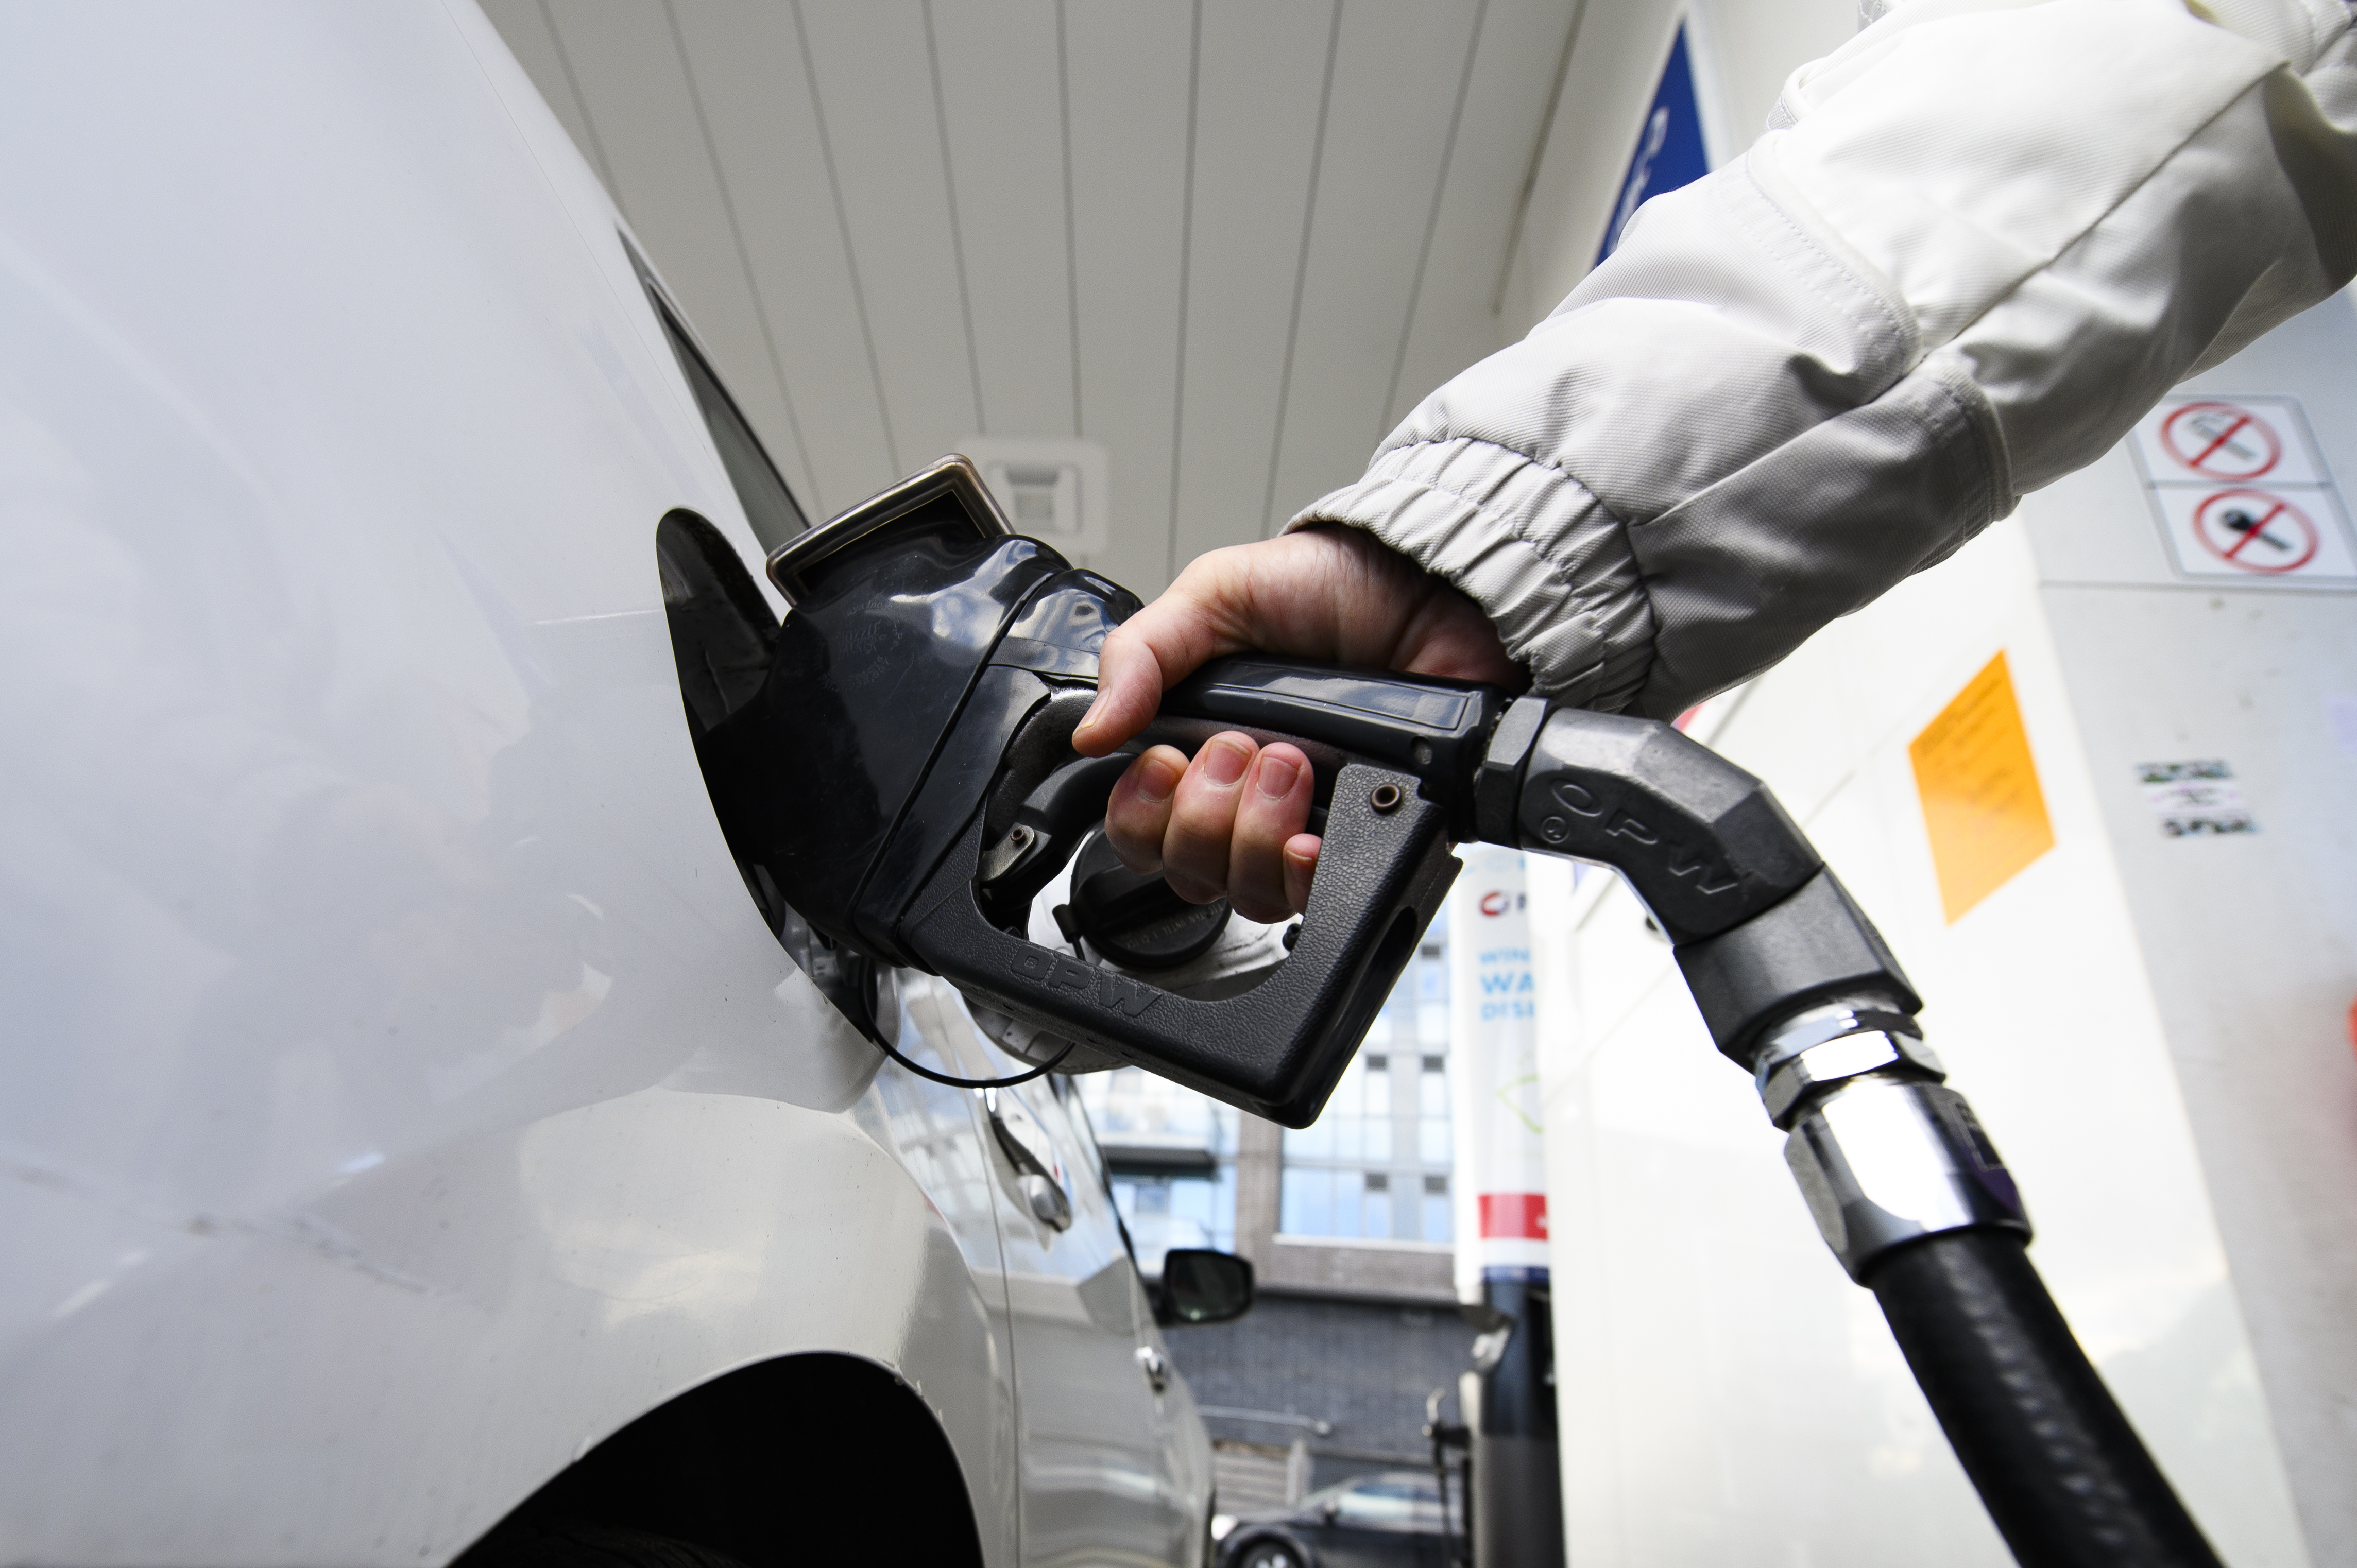 Inflation slowed sharply to 2.9% in January as gas prices fell